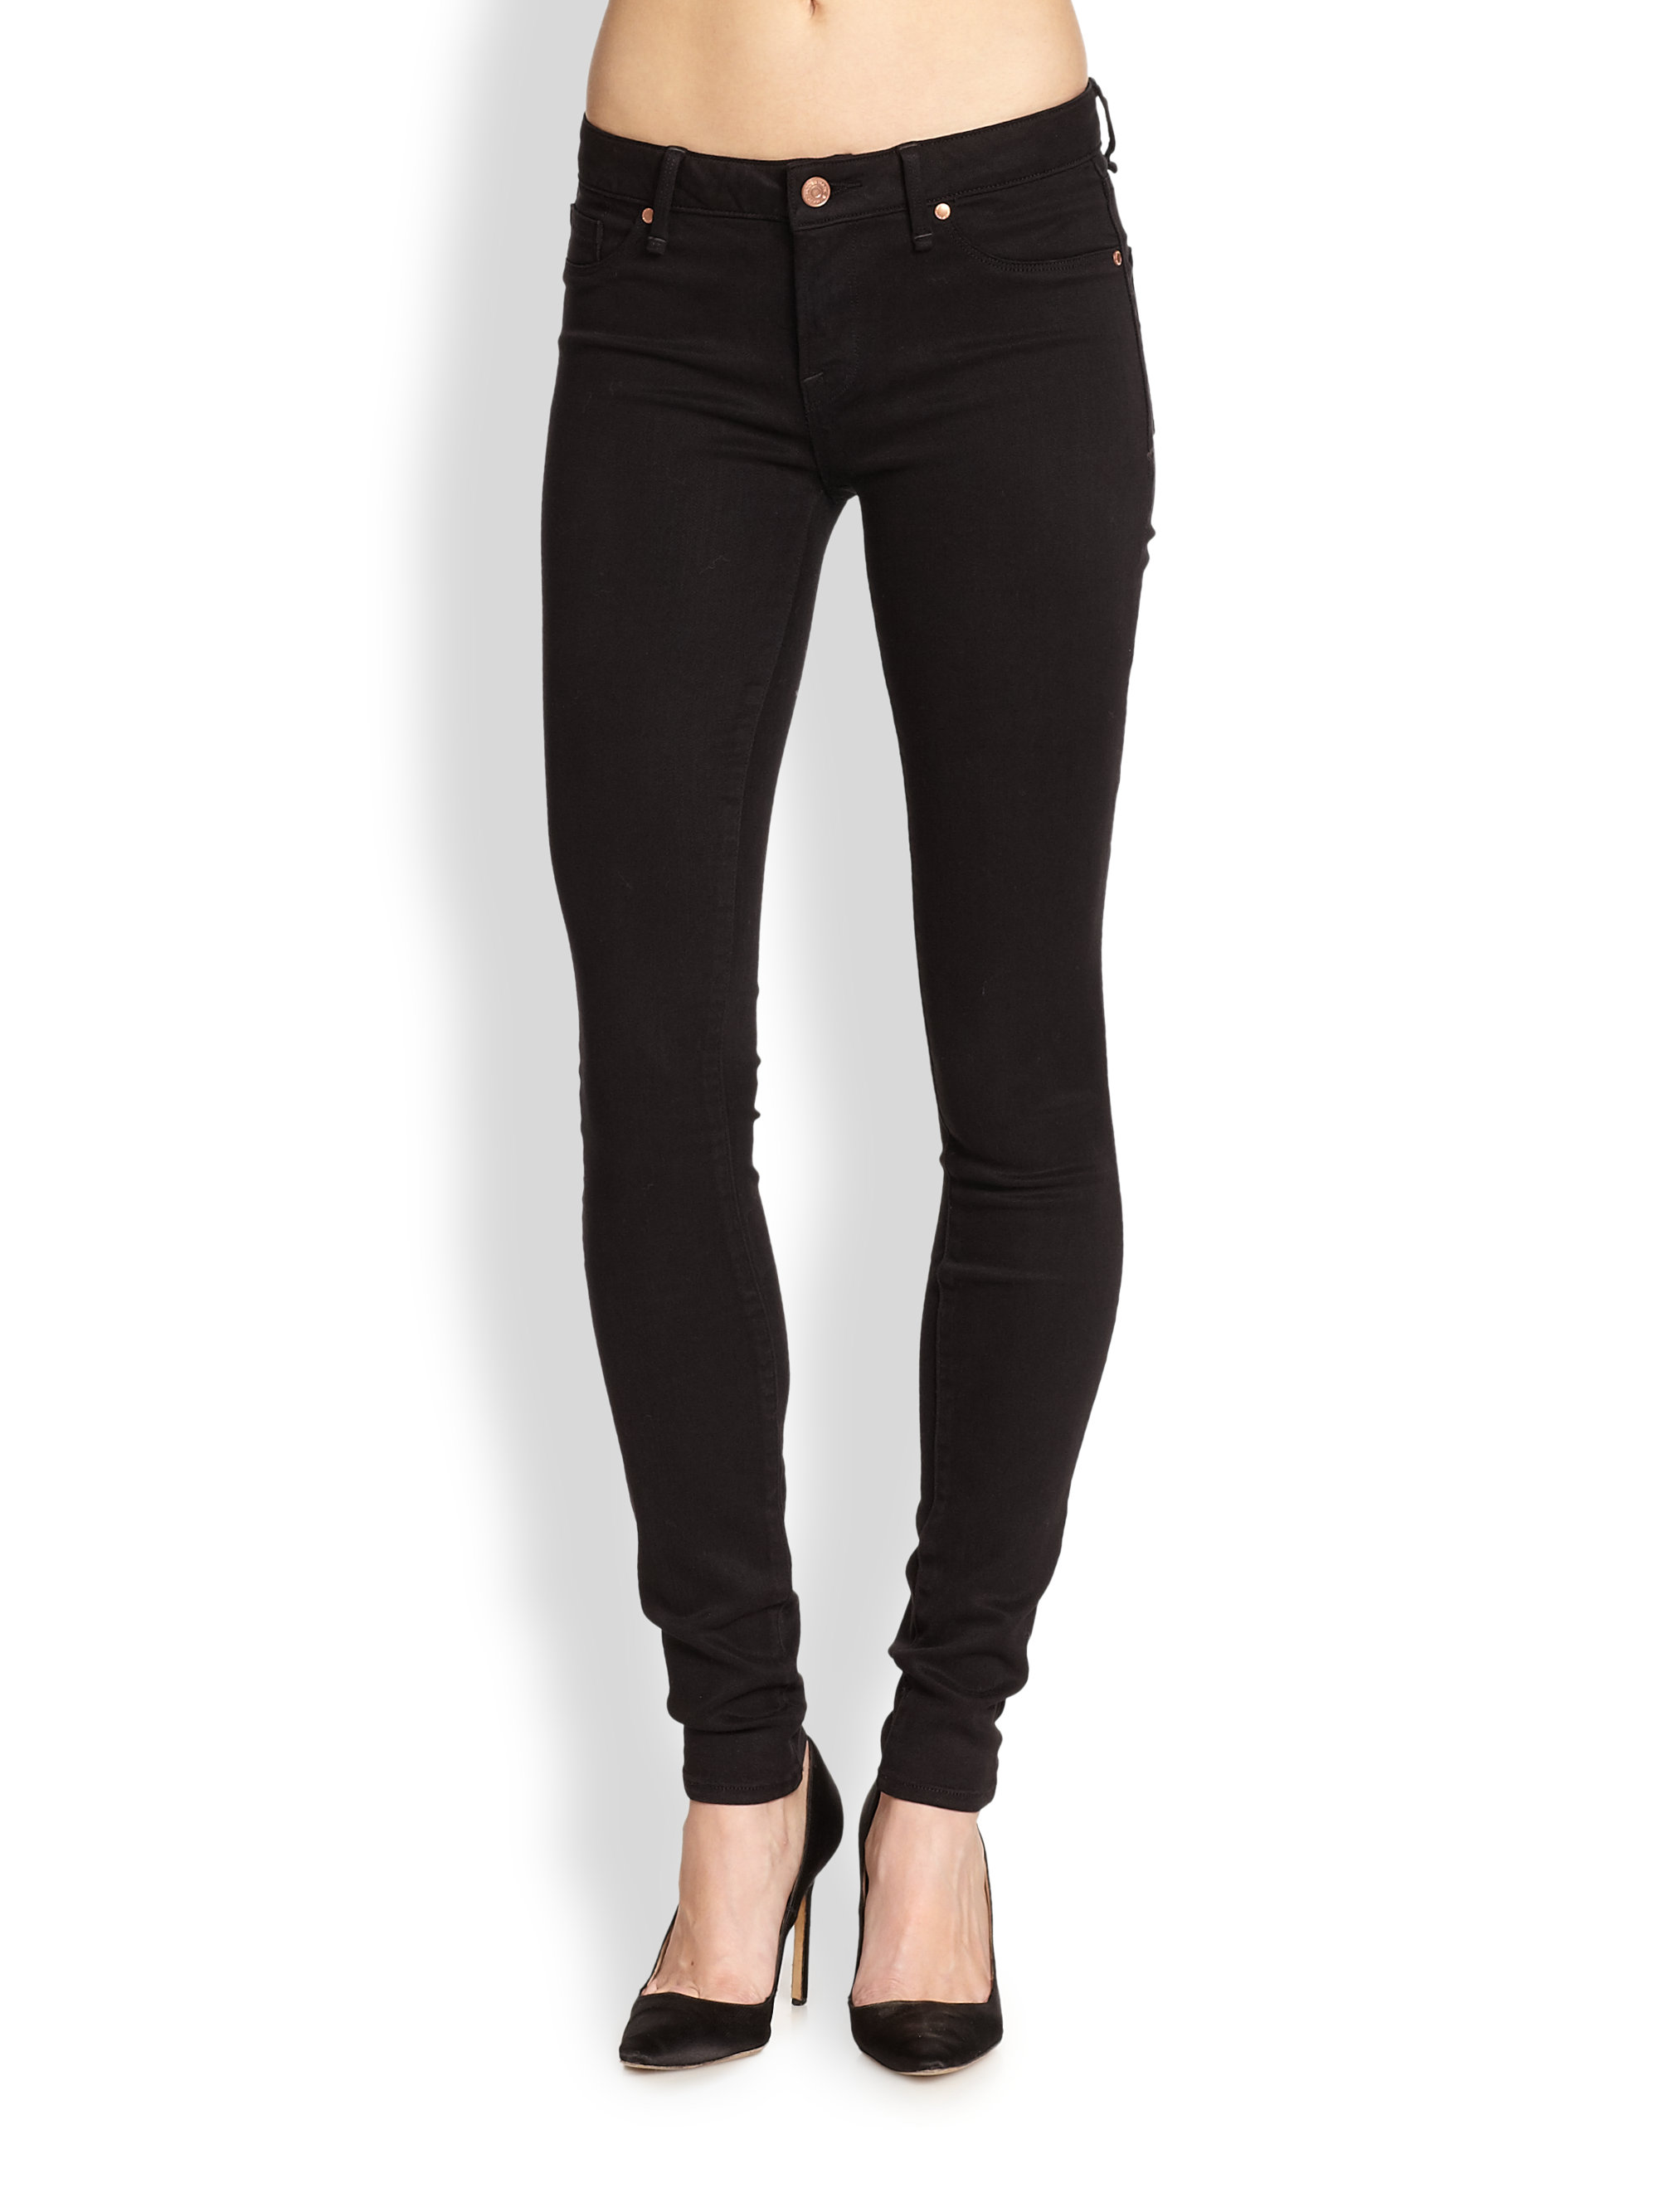 Lyst - Marc By Marc Jacobs Stick Mid-rise Skinny Jeans in Black